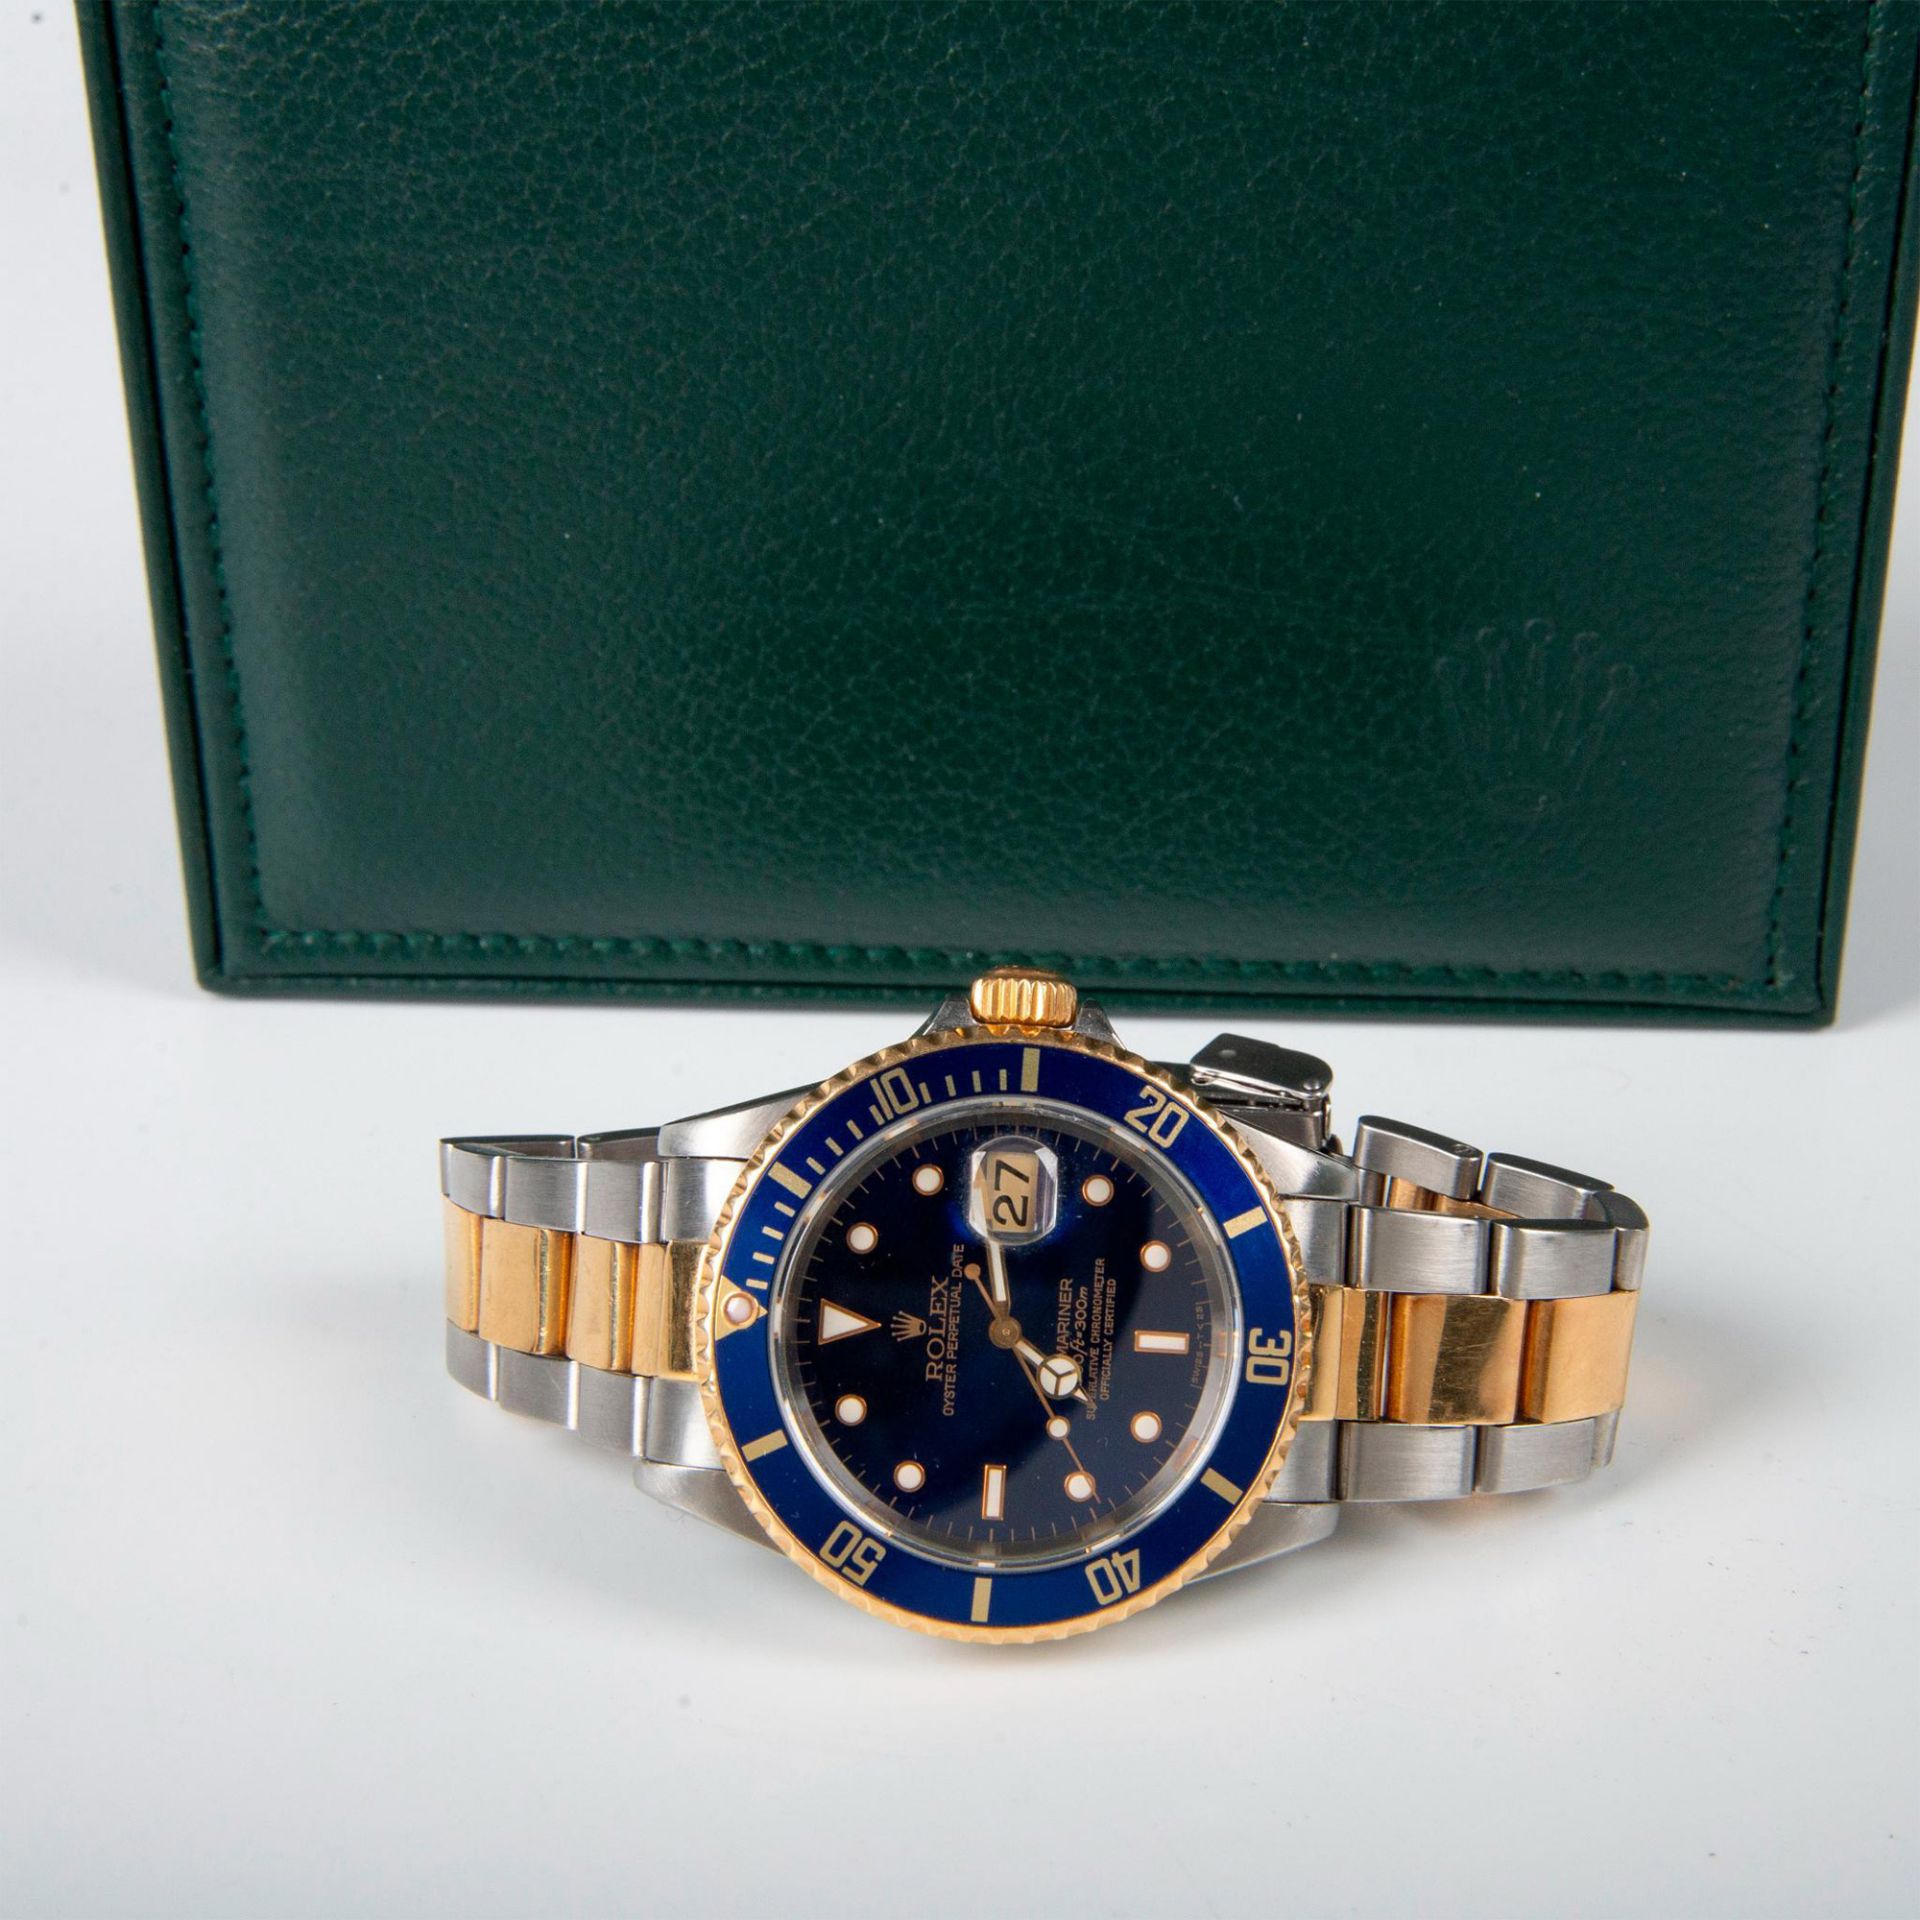 Rolex Submariner Oyster Perpetual Date Watch - Image 11 of 18